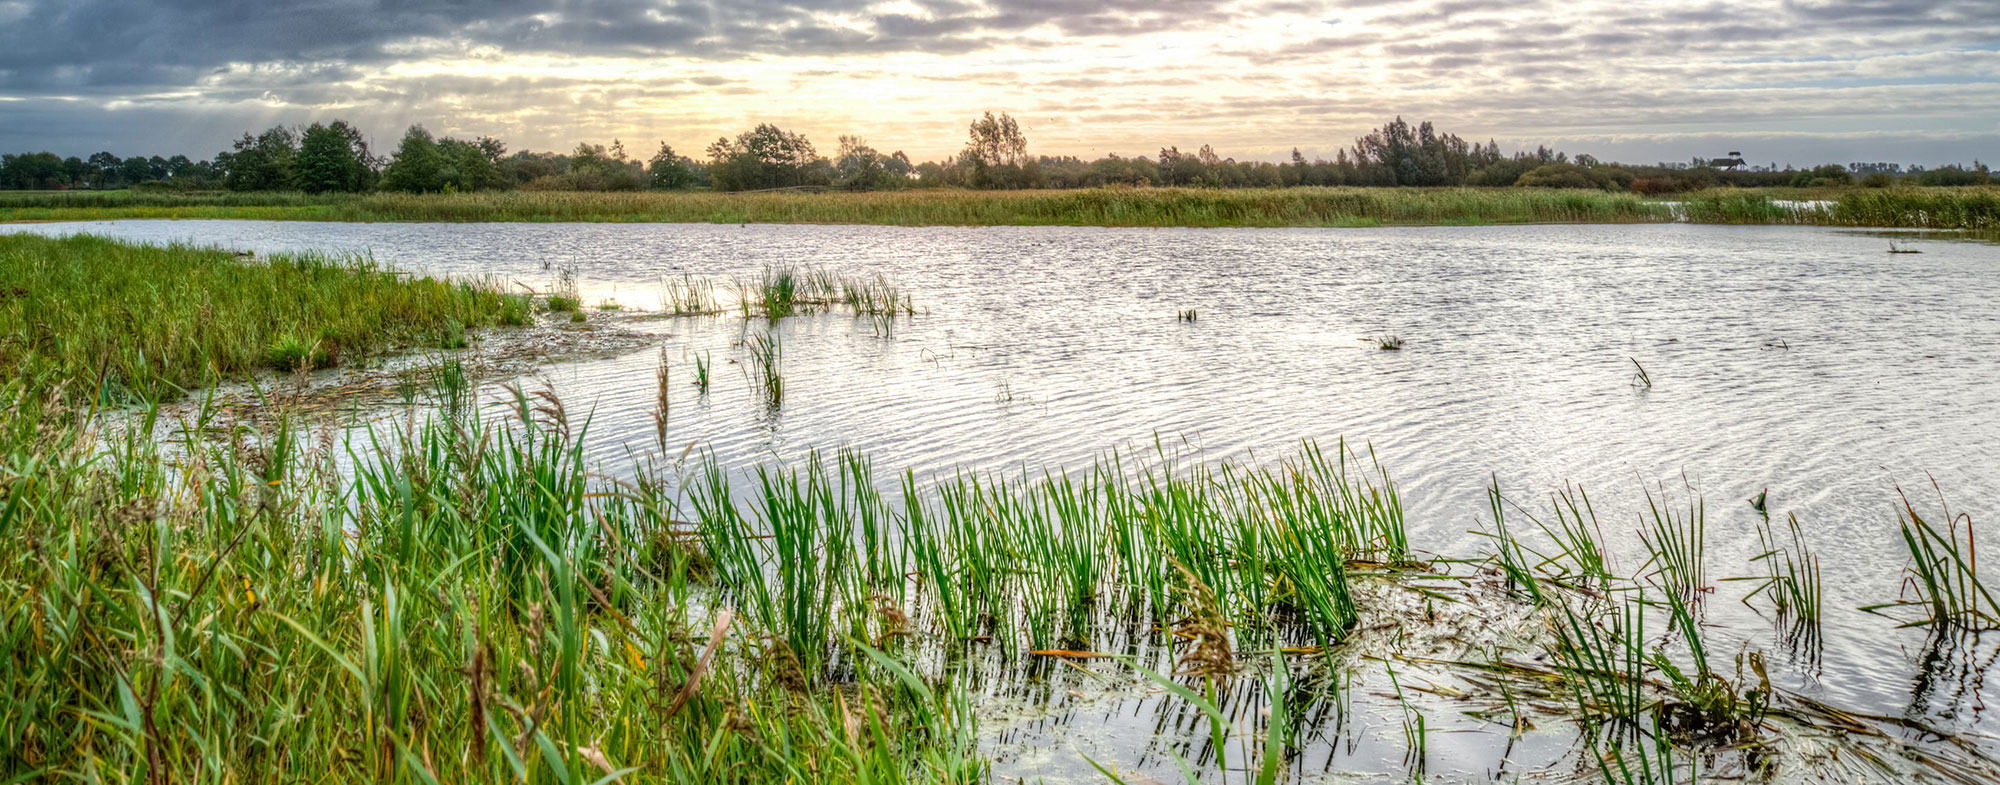 Norse Environmental Services - Professional Wetland Scientists, Certified Wetland Scientists, Certified Soil Scientists, Licensed Soil Evaluators, Foresters, Botanists, Registered Sanitarians and Licensed Construction Supervisors